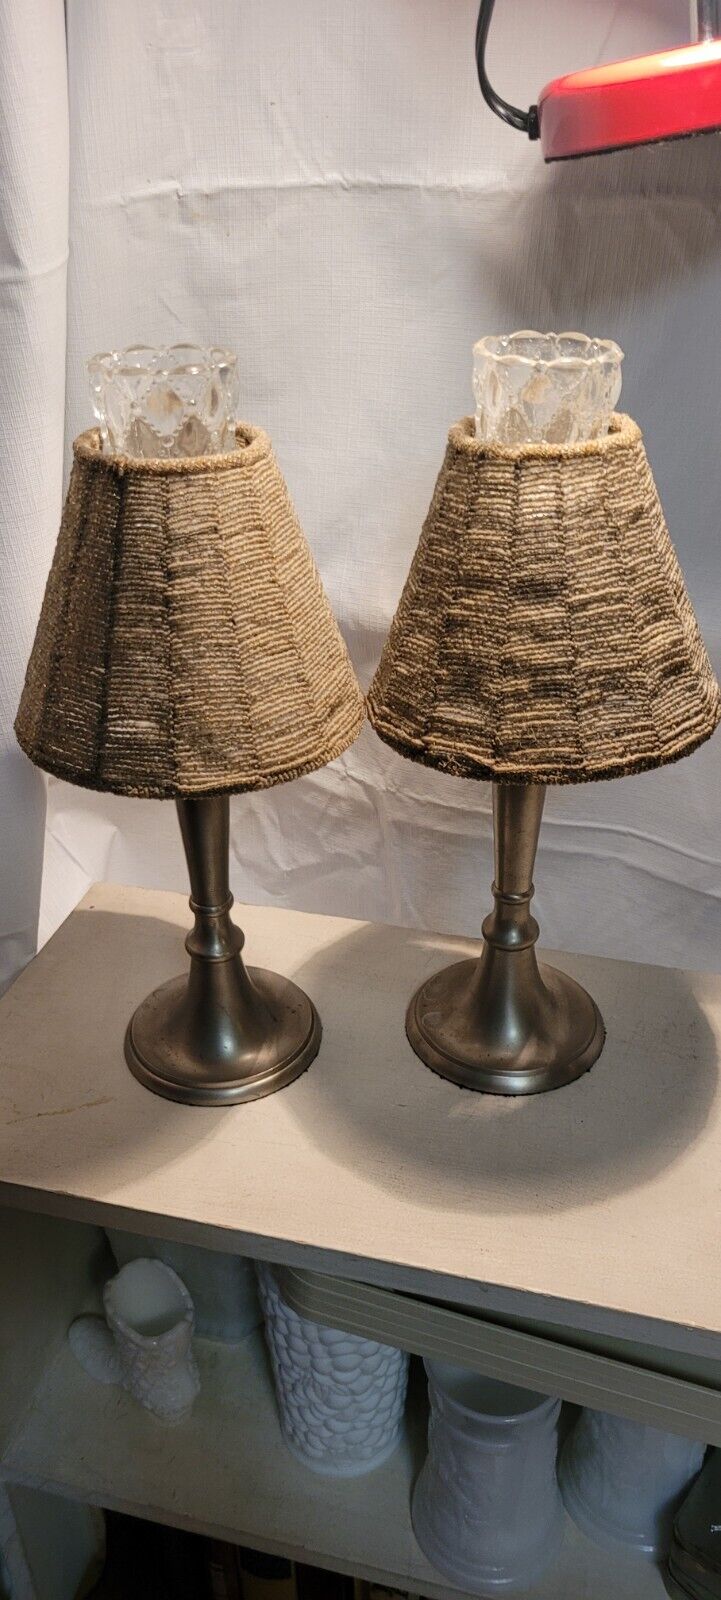 Vintage Gatco Solid Brass Candlestick Holders Pair W/Beaded Shades & Votives